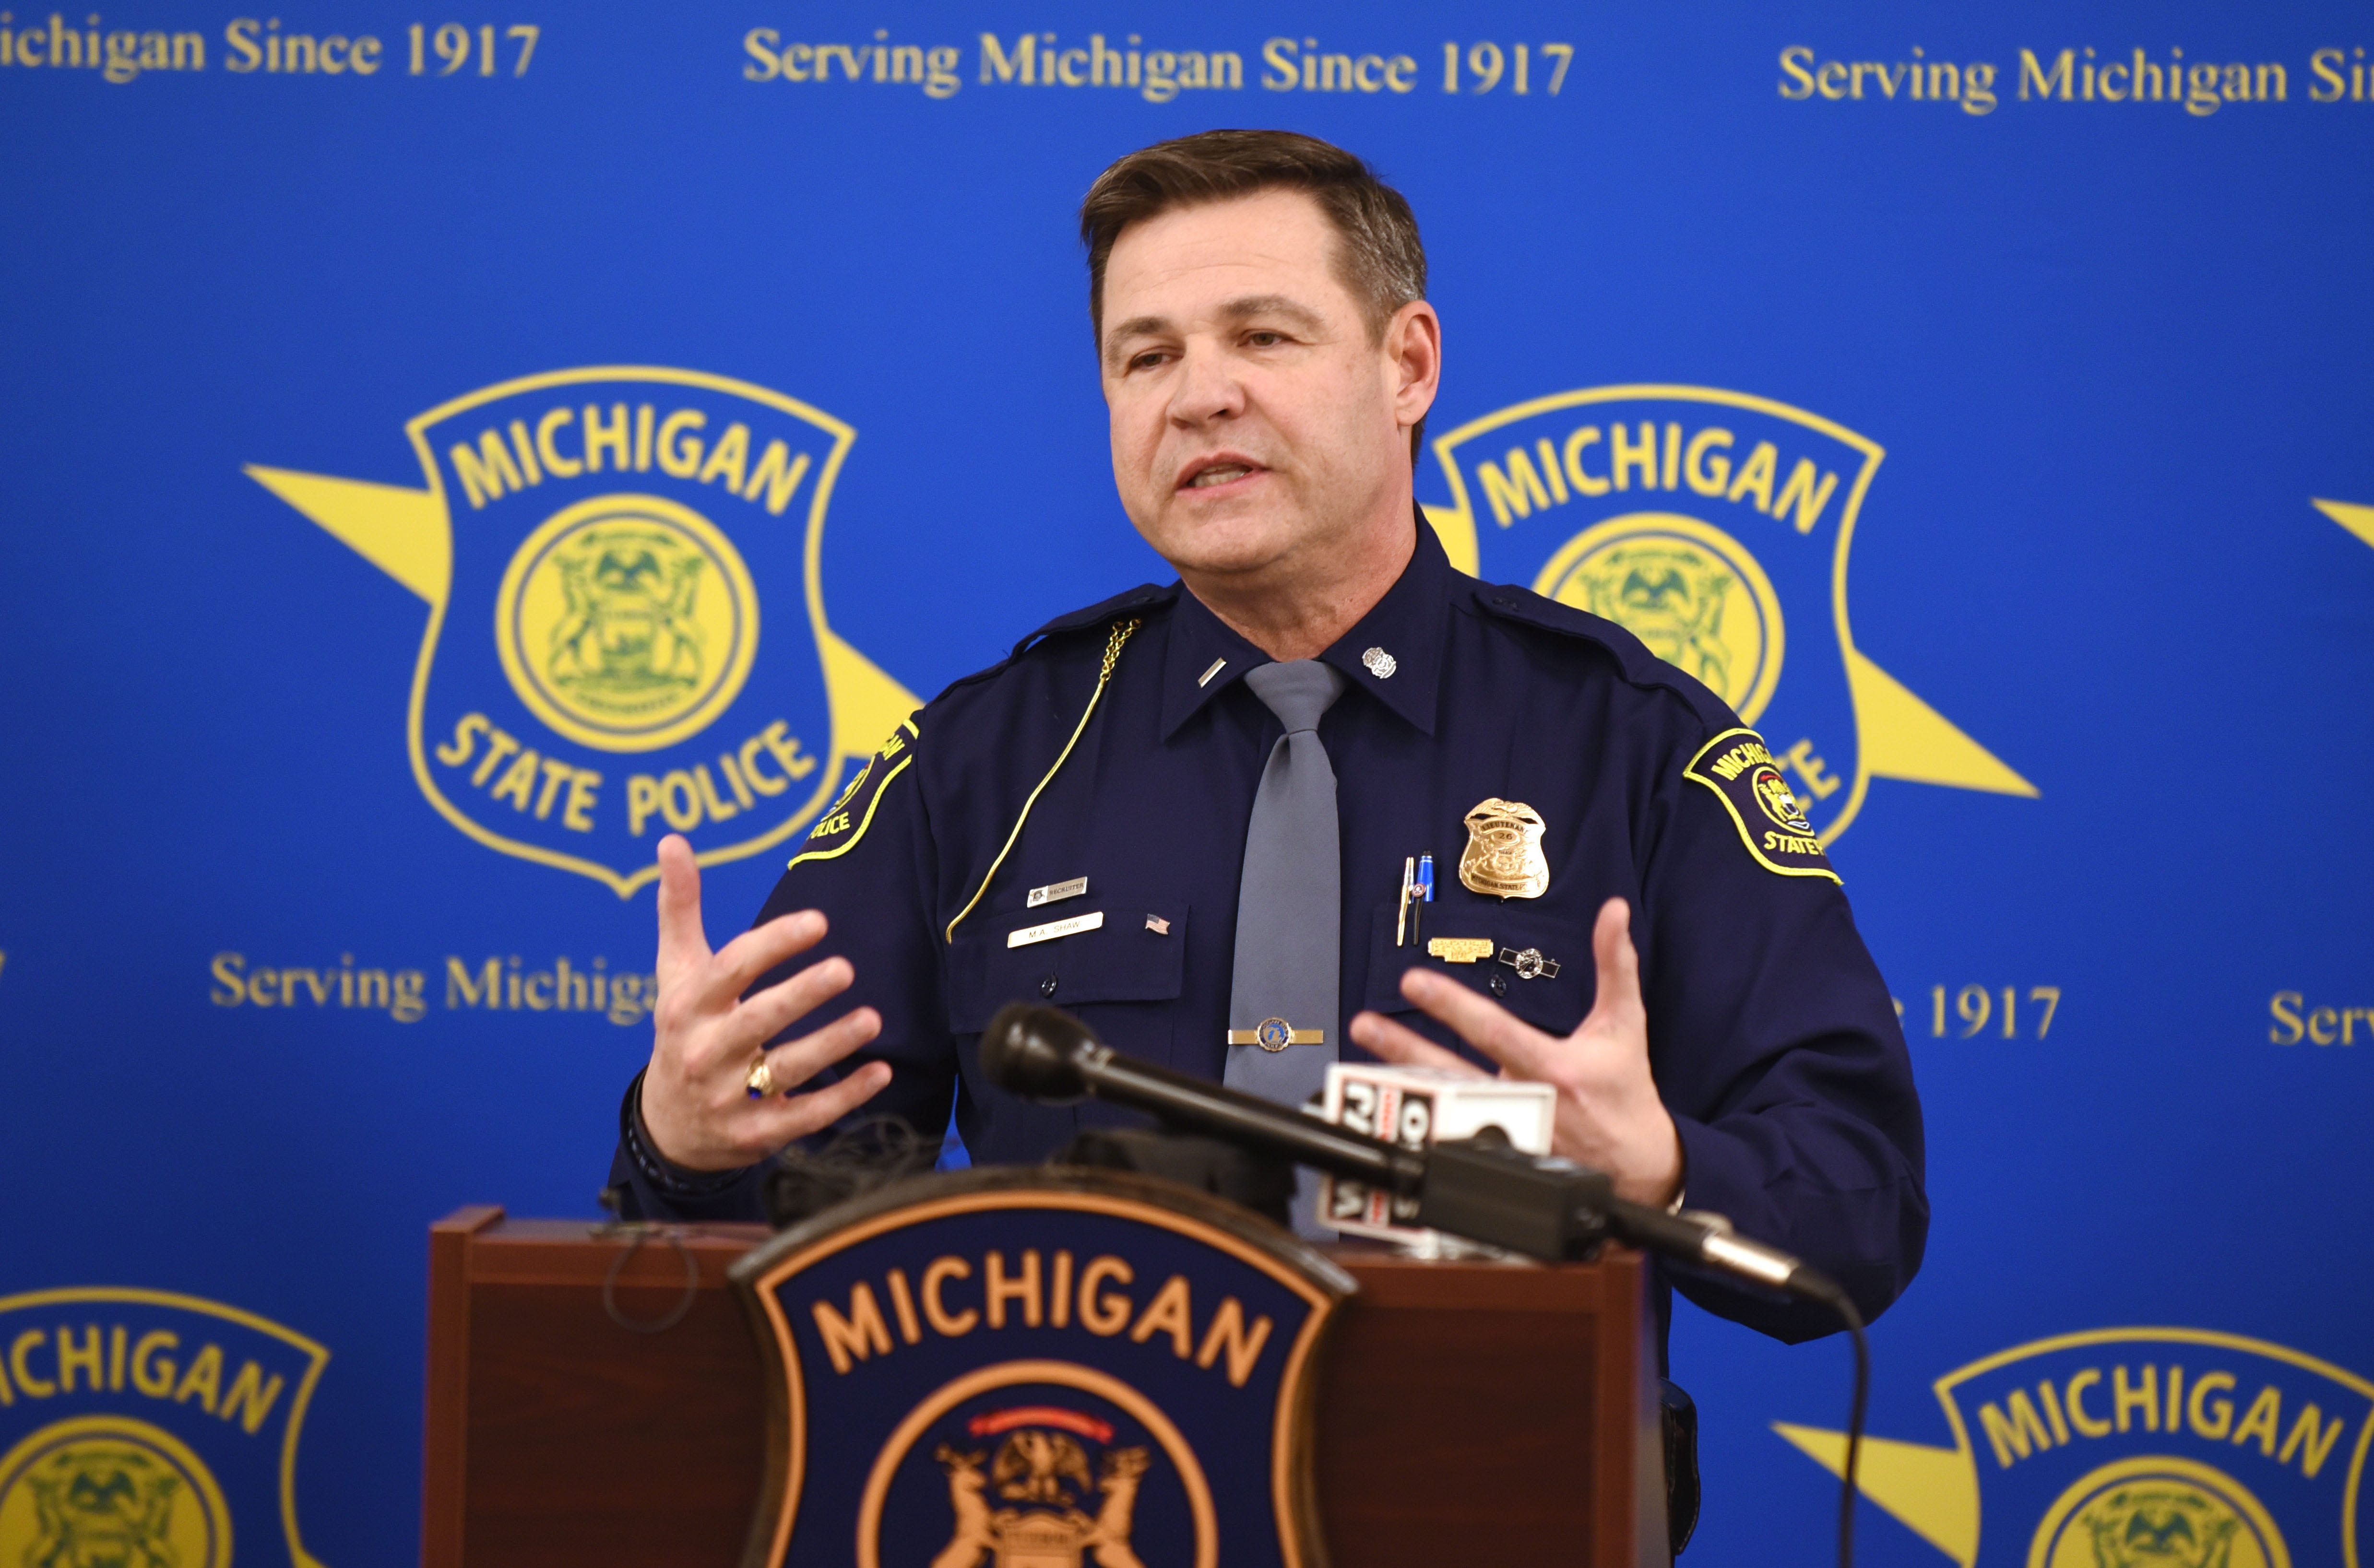 Michigan State Police Lt. Michael Shaw speaks to the news media on Wednesday about the shooting death of a 3-year-old boy on the Southfield Freeway after the suspect turned himself in to police.